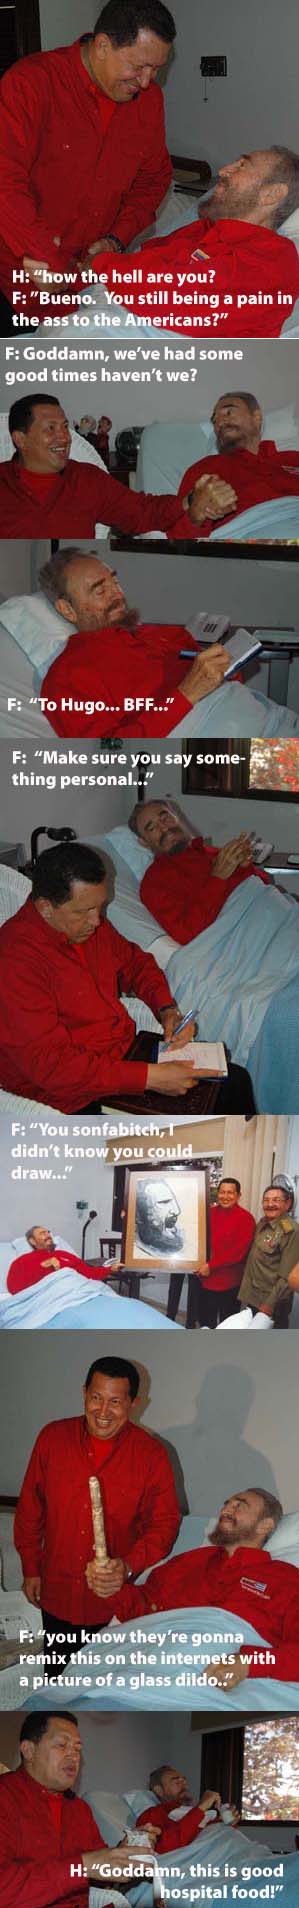 Photo session of Hugo Chavez visiting Fidel Castro in the hospital.